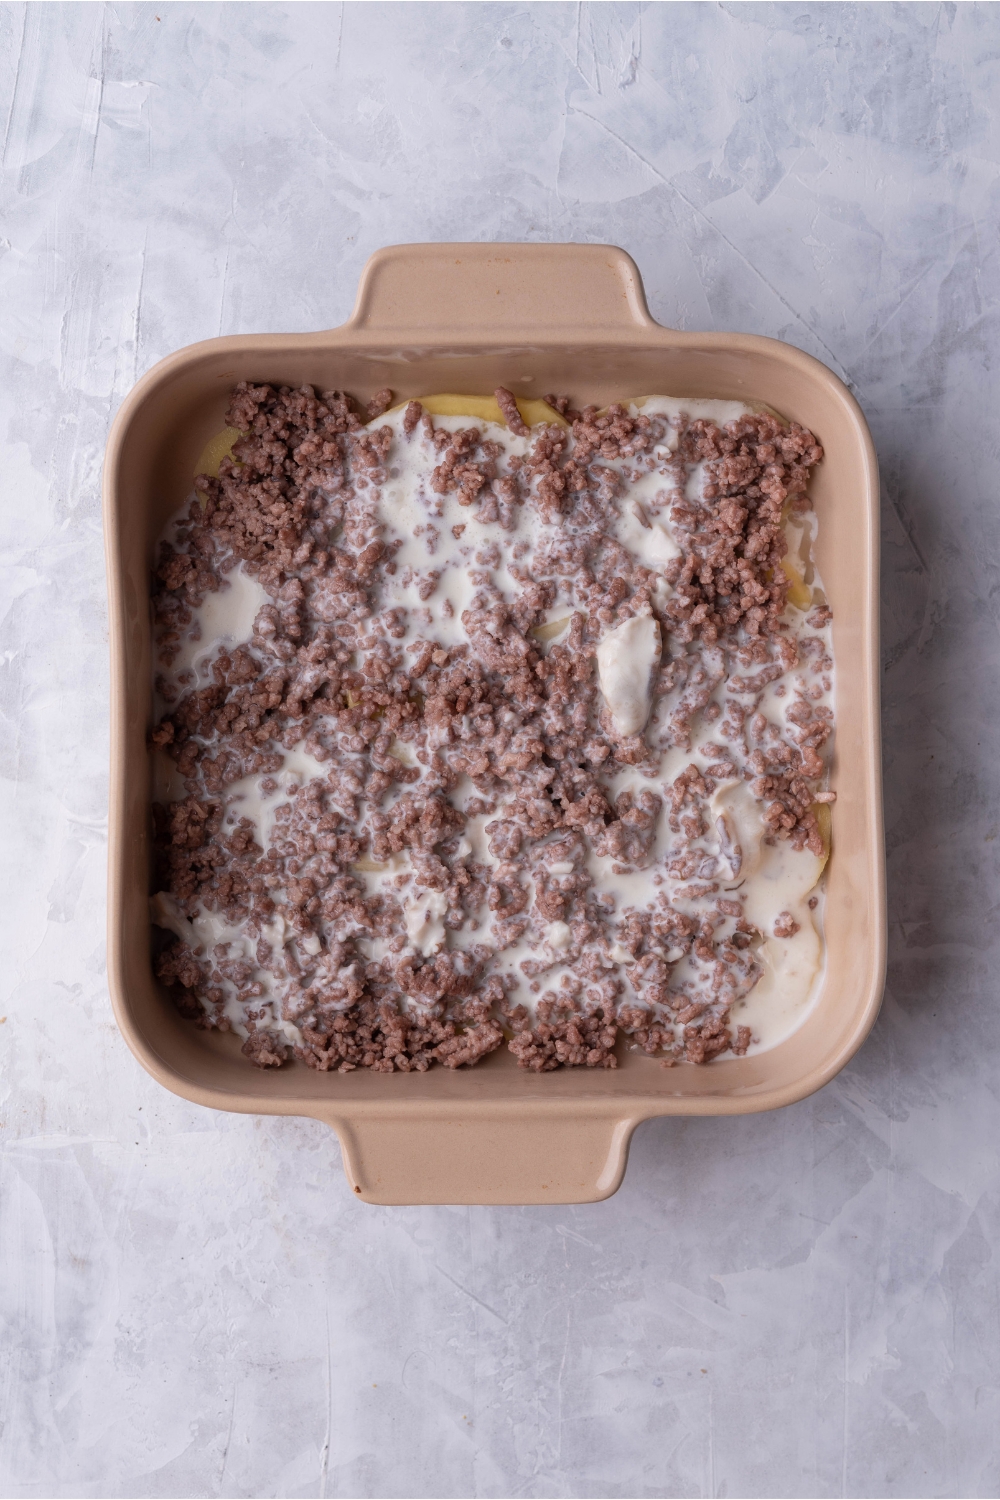 Brown baking dish with layers of cooked ground beef and a creamy sauce mixture.